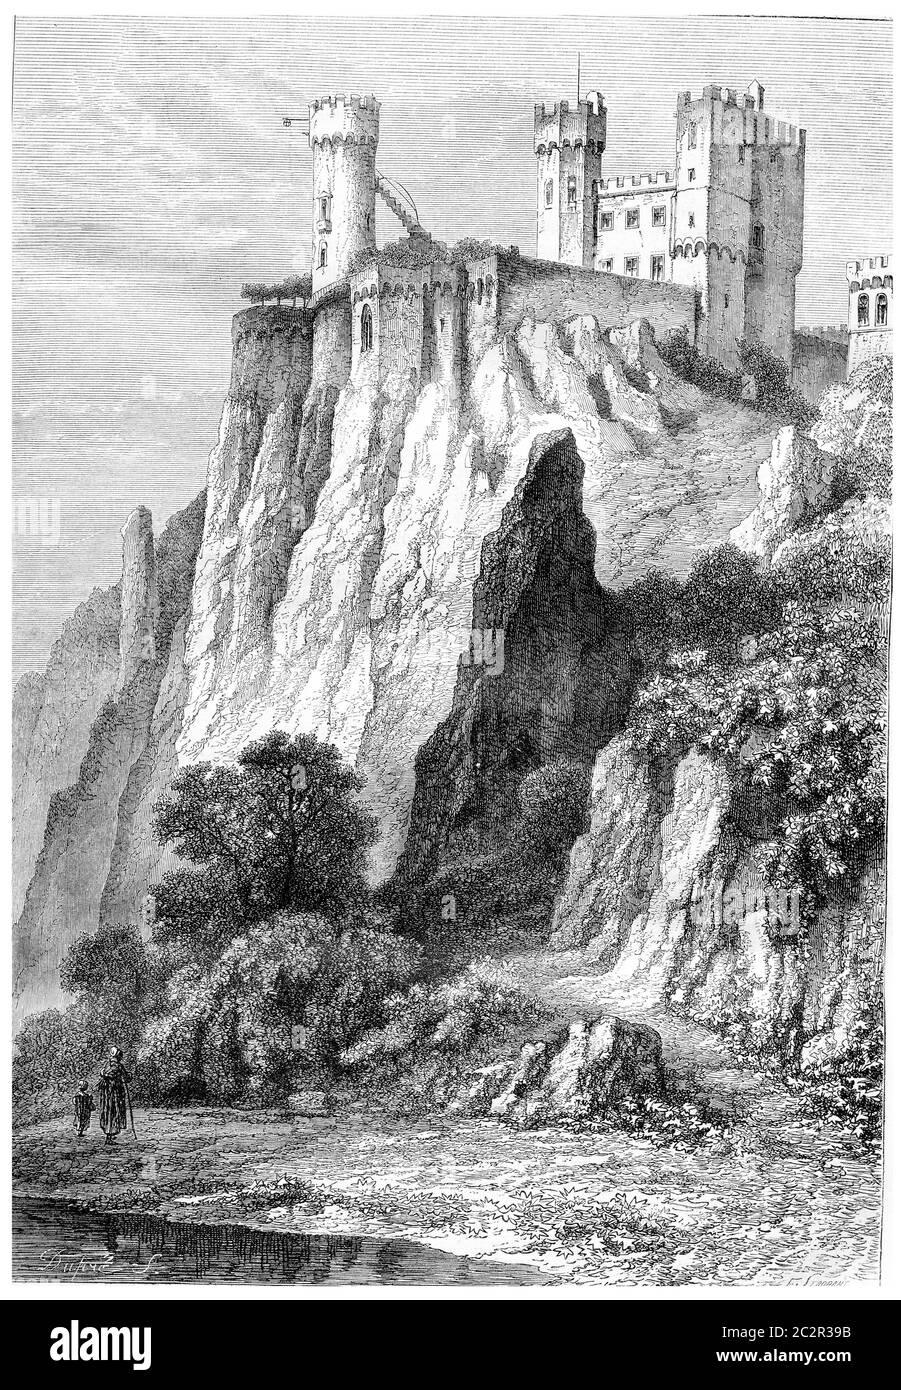 Rheinstein Castle in Rhineland-Palatinate, Germany, shown above the banks of the Rhine River, vintage engraved illustration. Magasin Pittoresque - 186 Stock Photo